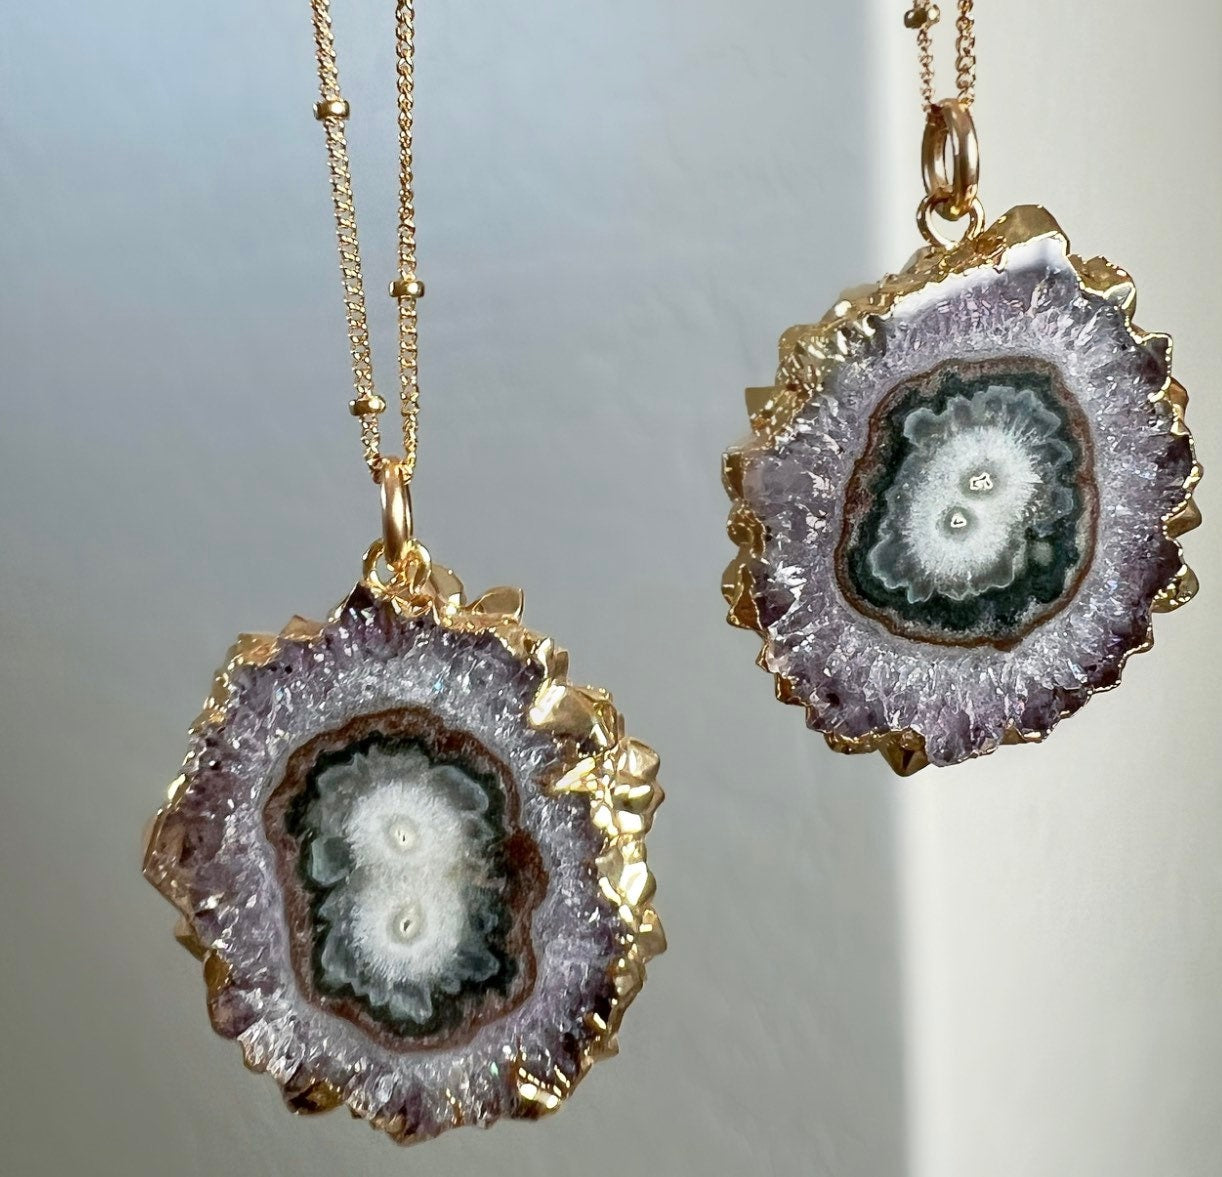 Amethyst Stalactite Necklace, Raw Amethyst Stalactite Slice Necklace, Natural Amethyst Pendant, One of a Kind Crystal Pendant